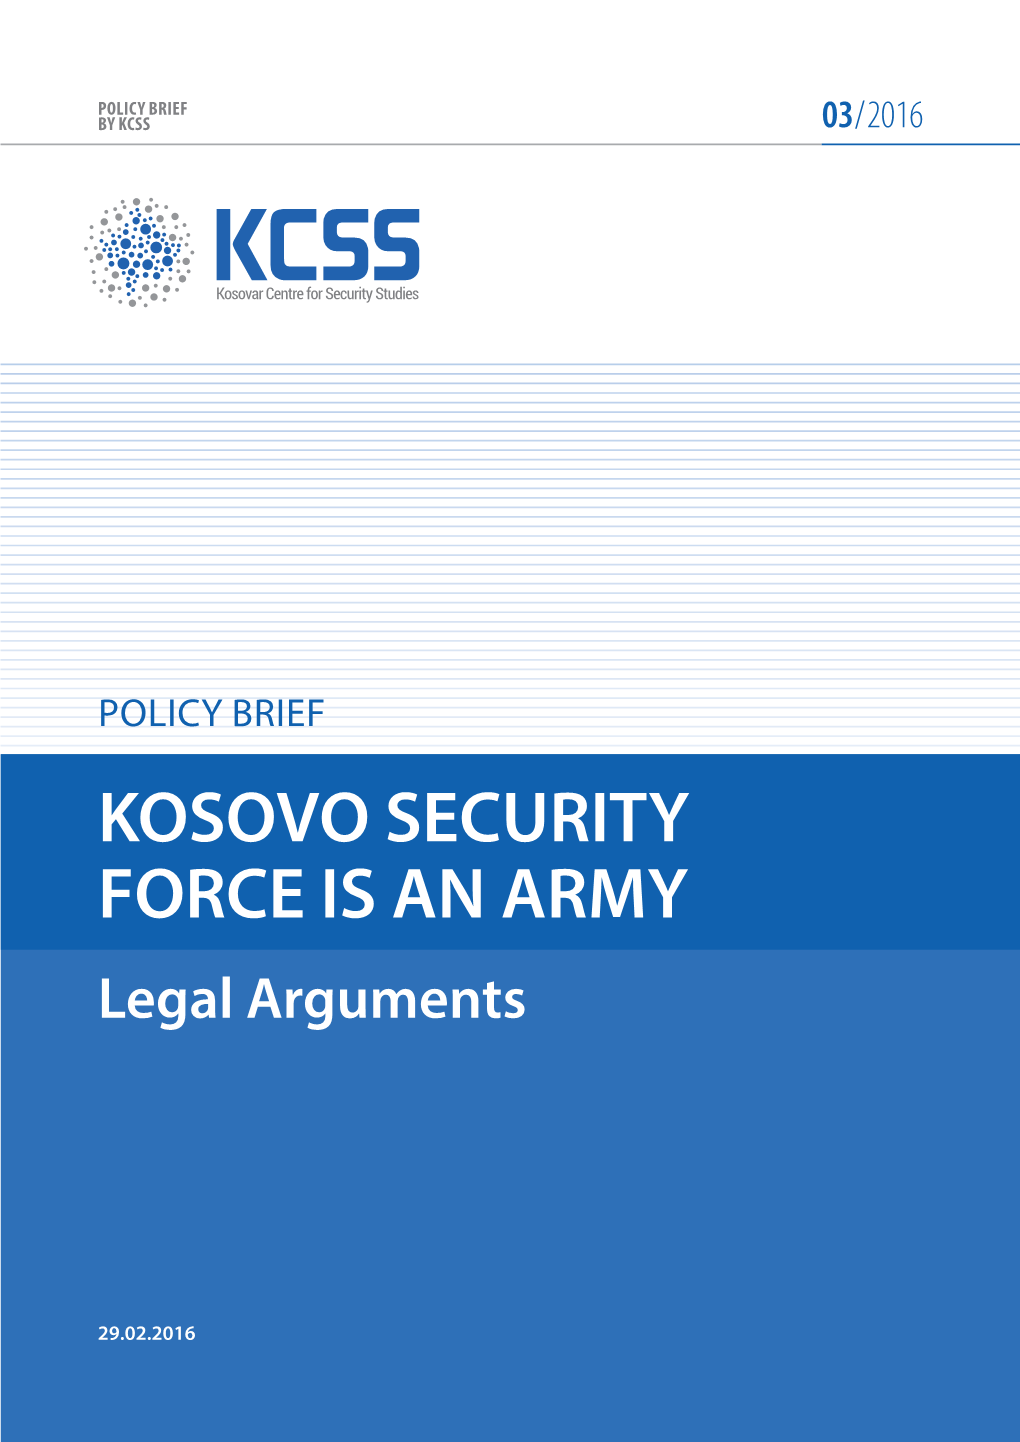 Kosovo SECURITY FORCE IS an ARMY Coveringlegal Period: Arguments 2012-2015